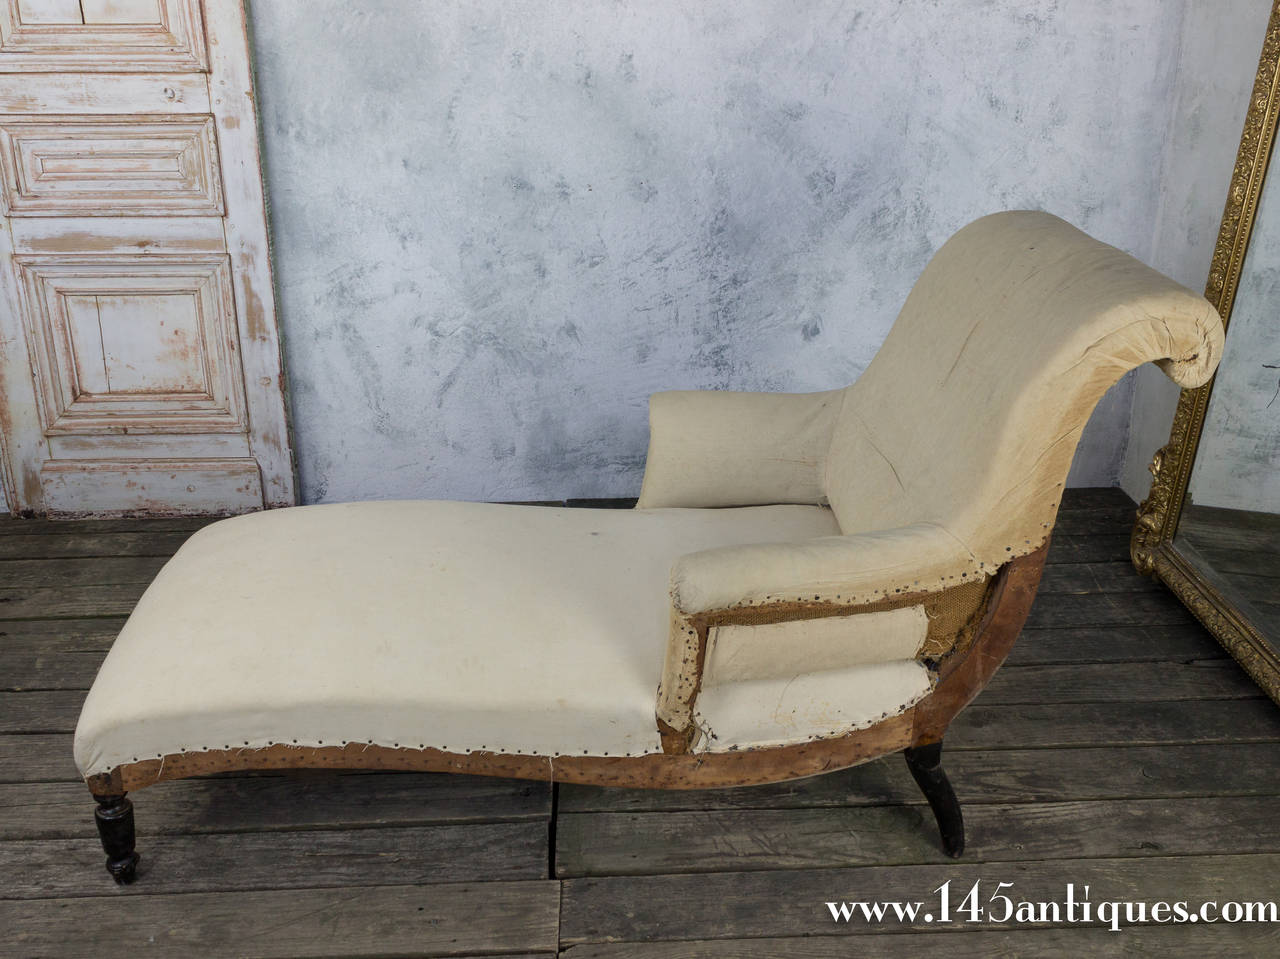 French Napoleon III chaise lounge in muslin featuring gentle curves with a scrolled back. Sold as is. Upholstery services available upon request.